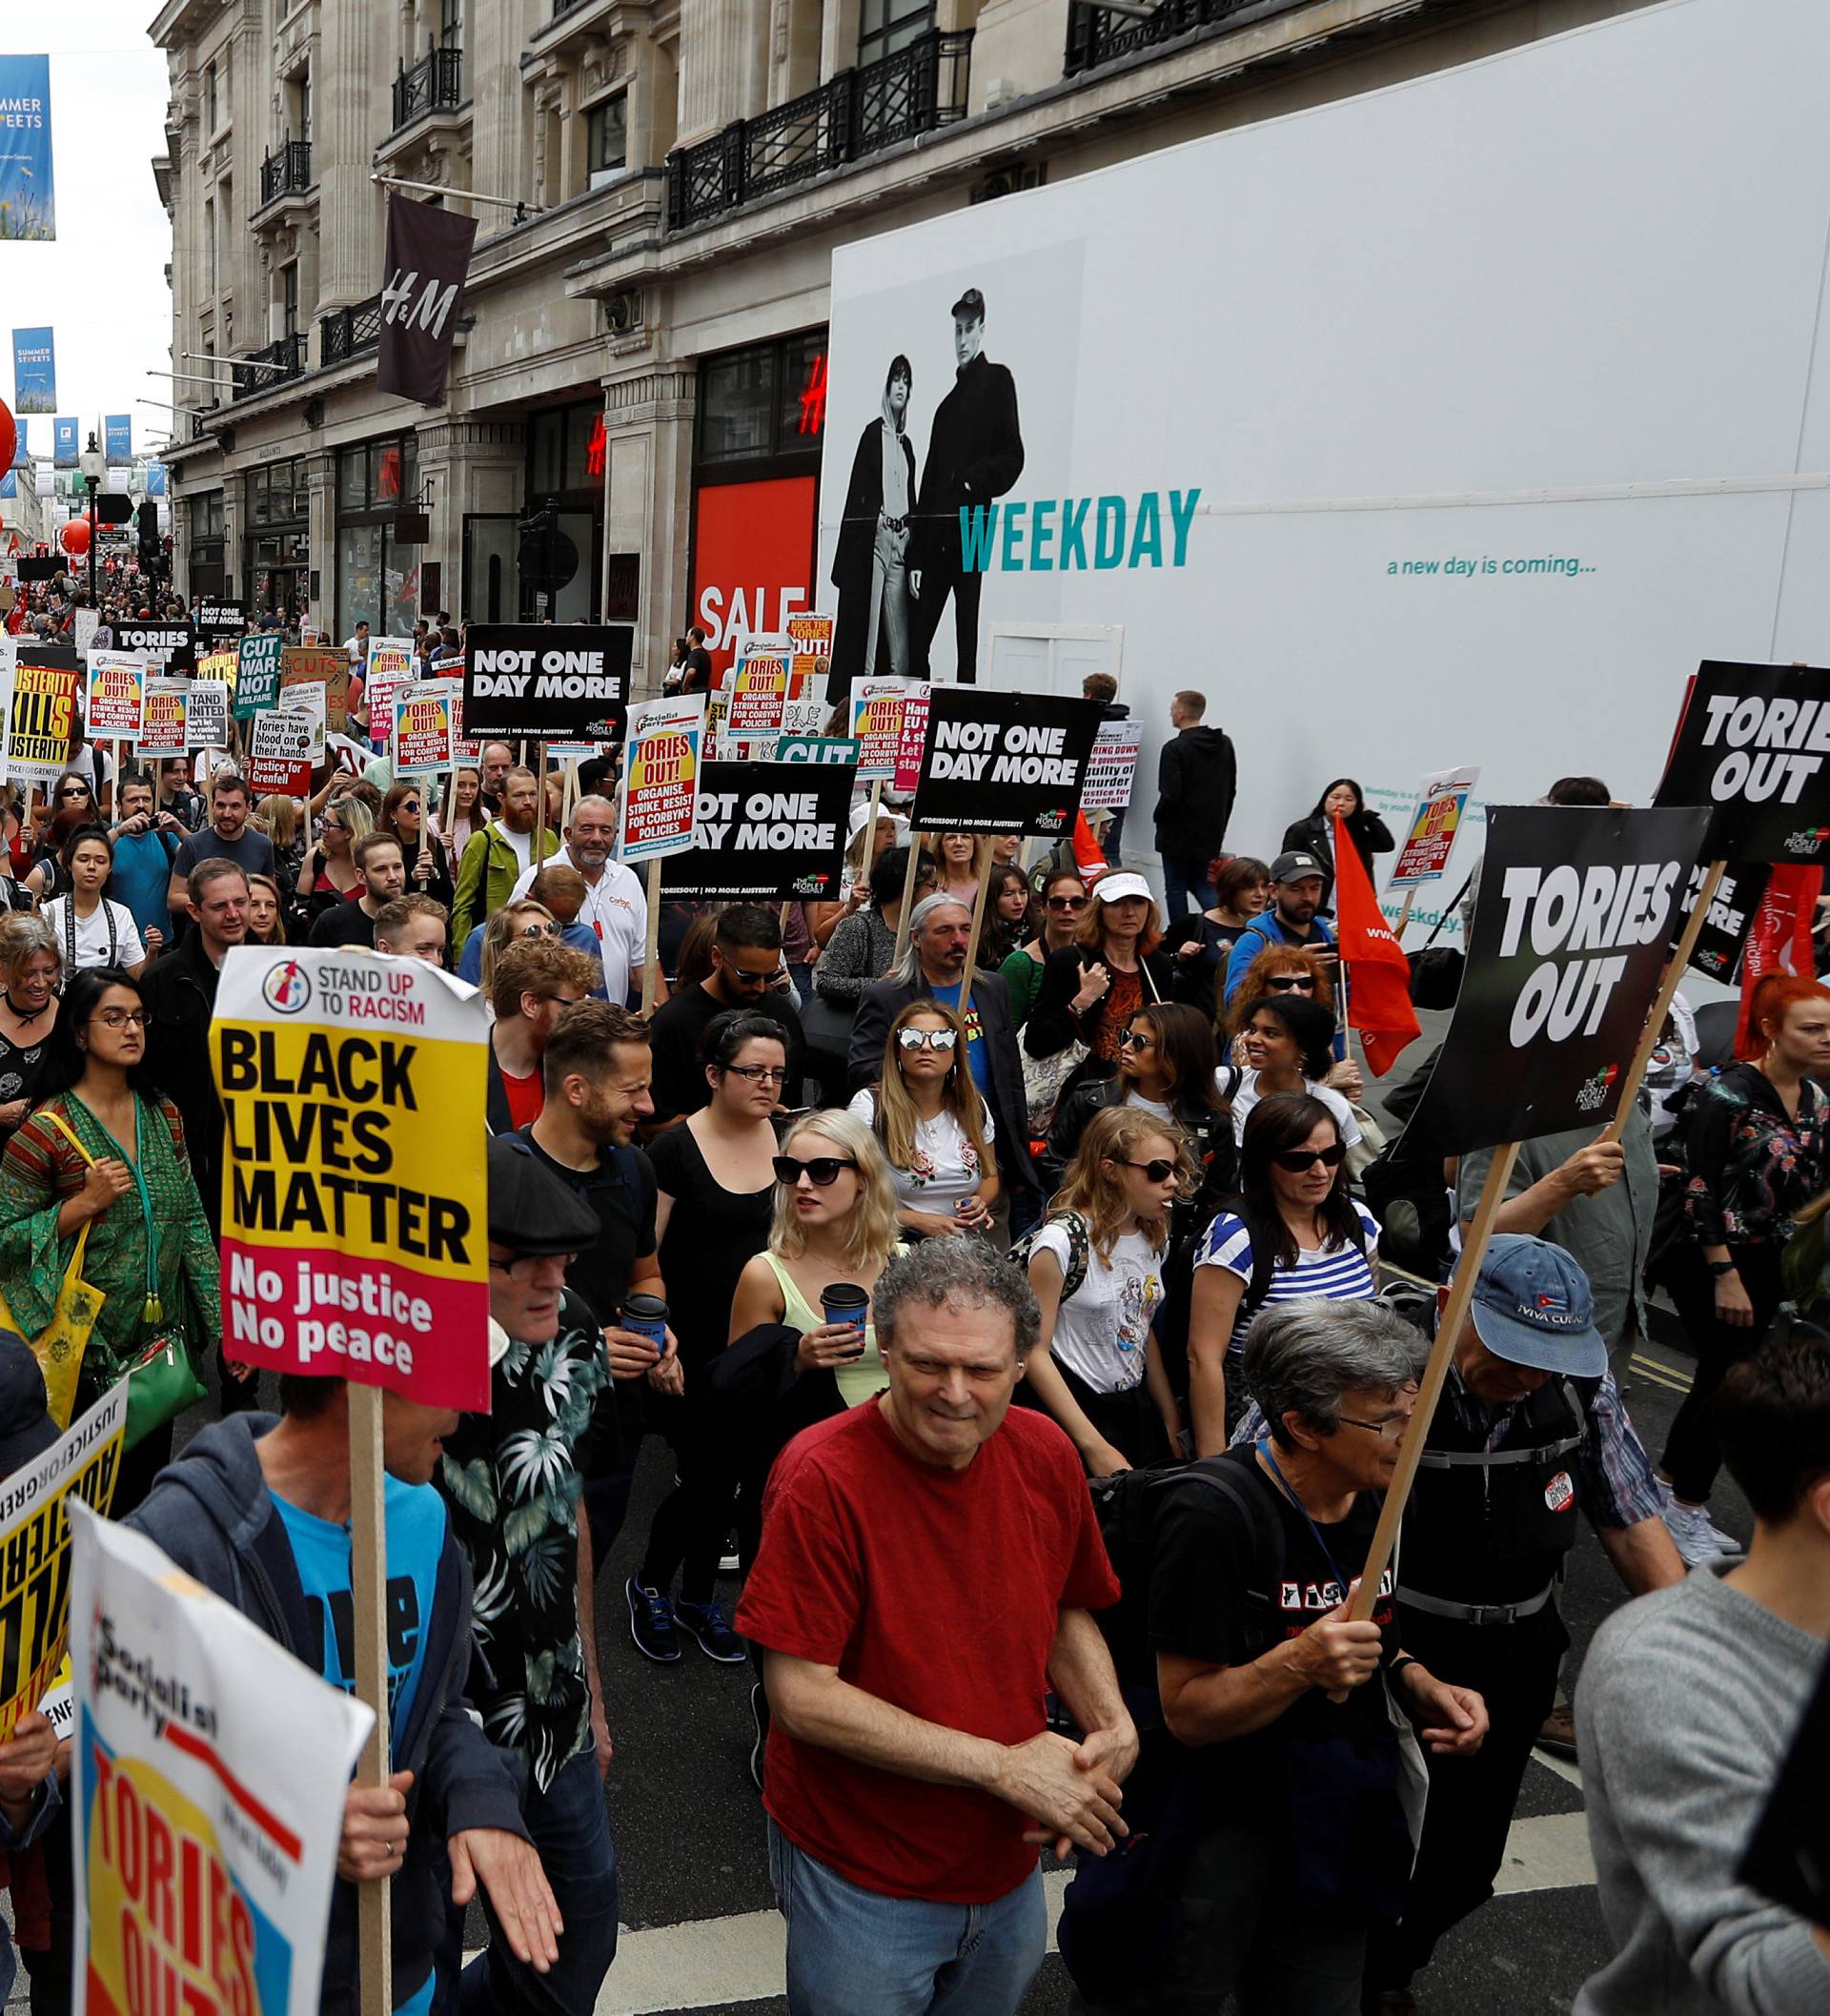 Demonstrators walk towards Parliament Square on an anti-austerity rally and march organised by campaigners Peoples' Assembly, in central London